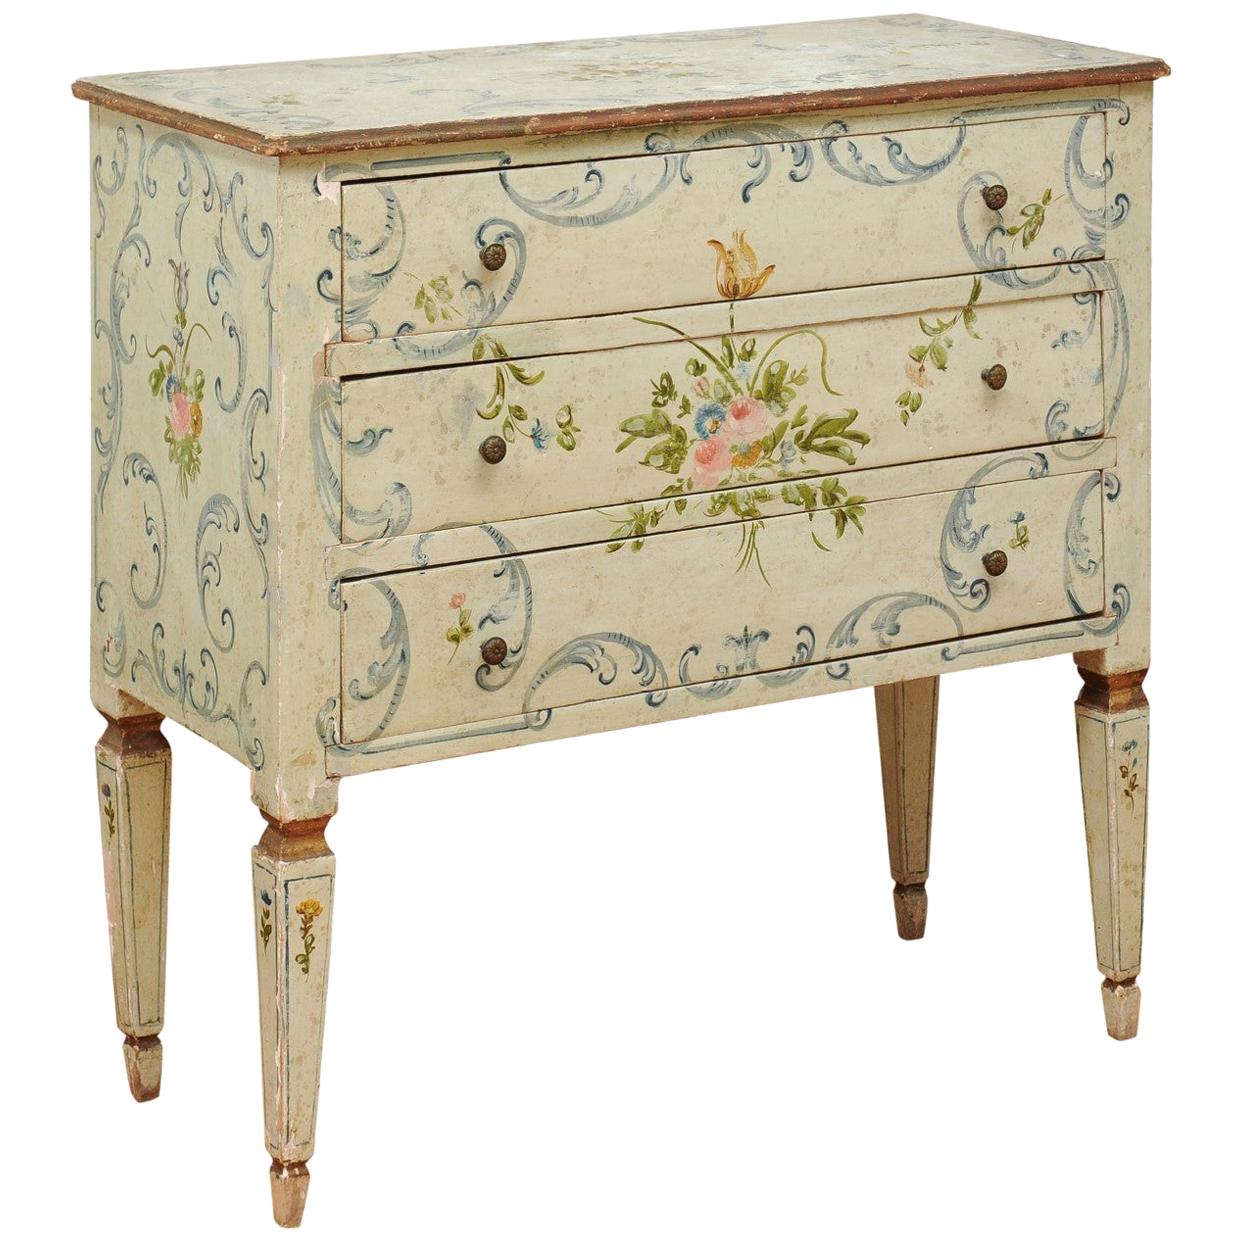 French 1870s Napoléon III Three-Drawer Chest with Painted Floral Decor